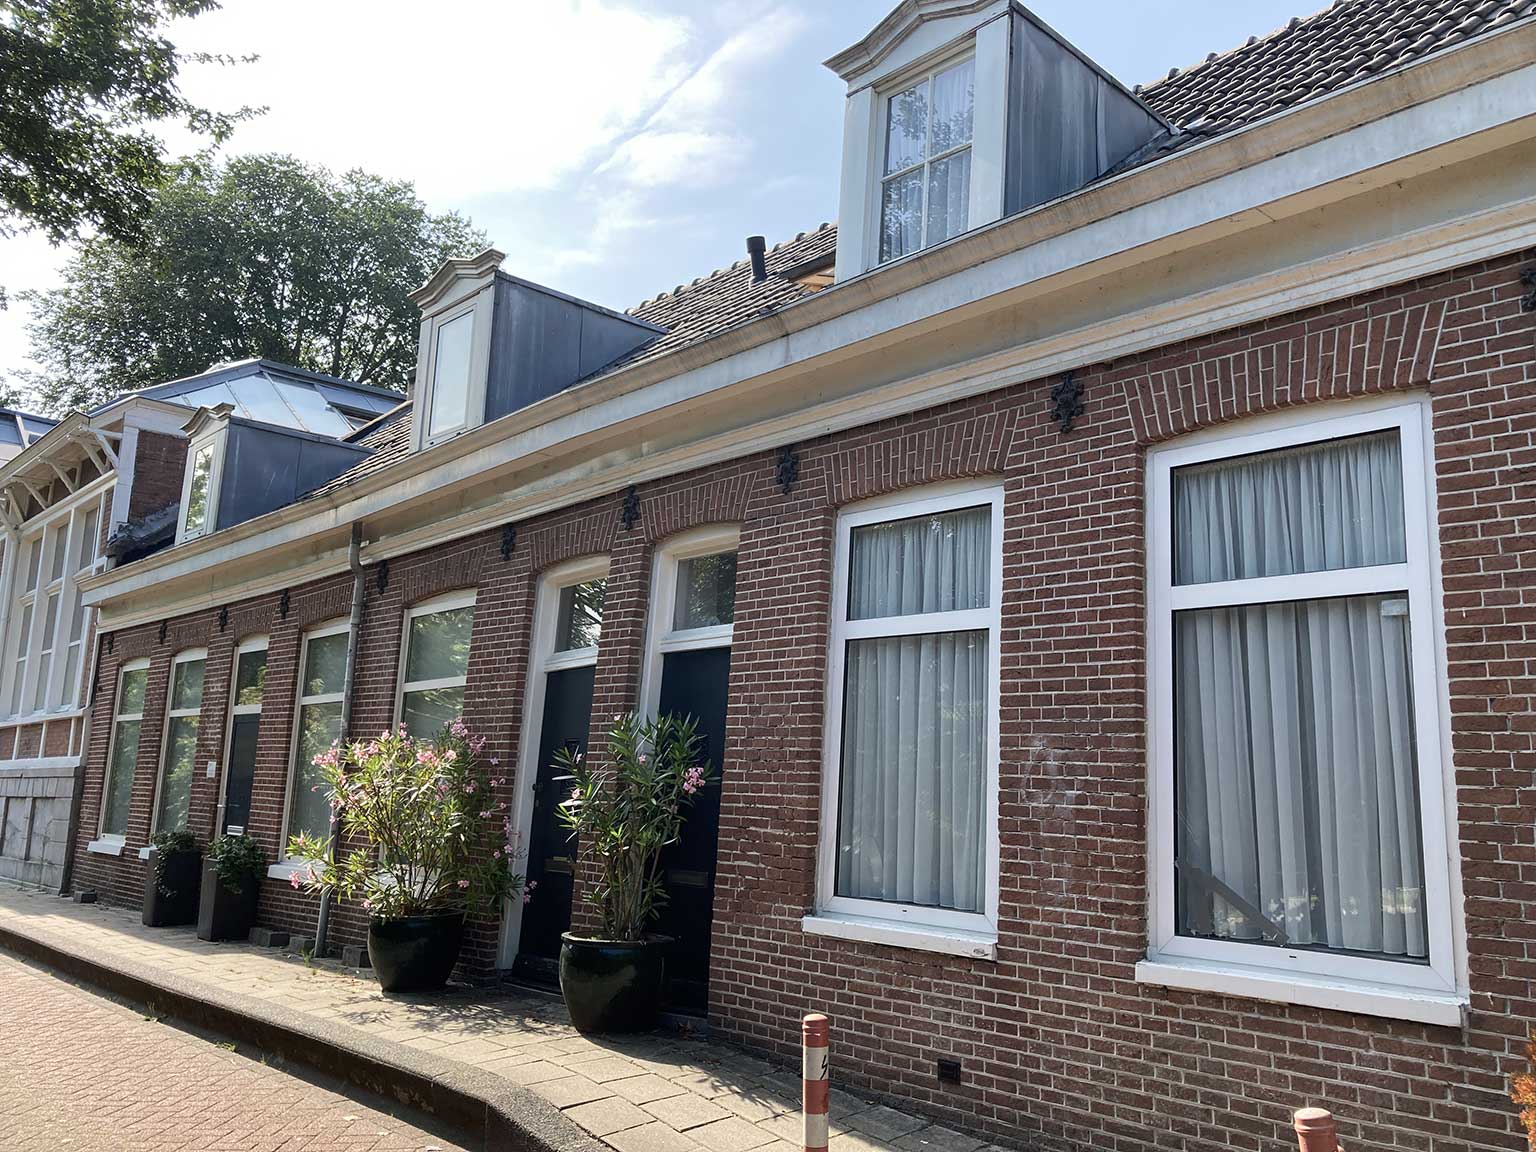 Houses from 1890 at Zandpad 2A, 2B, Amsterdam, remnant of pre-city building